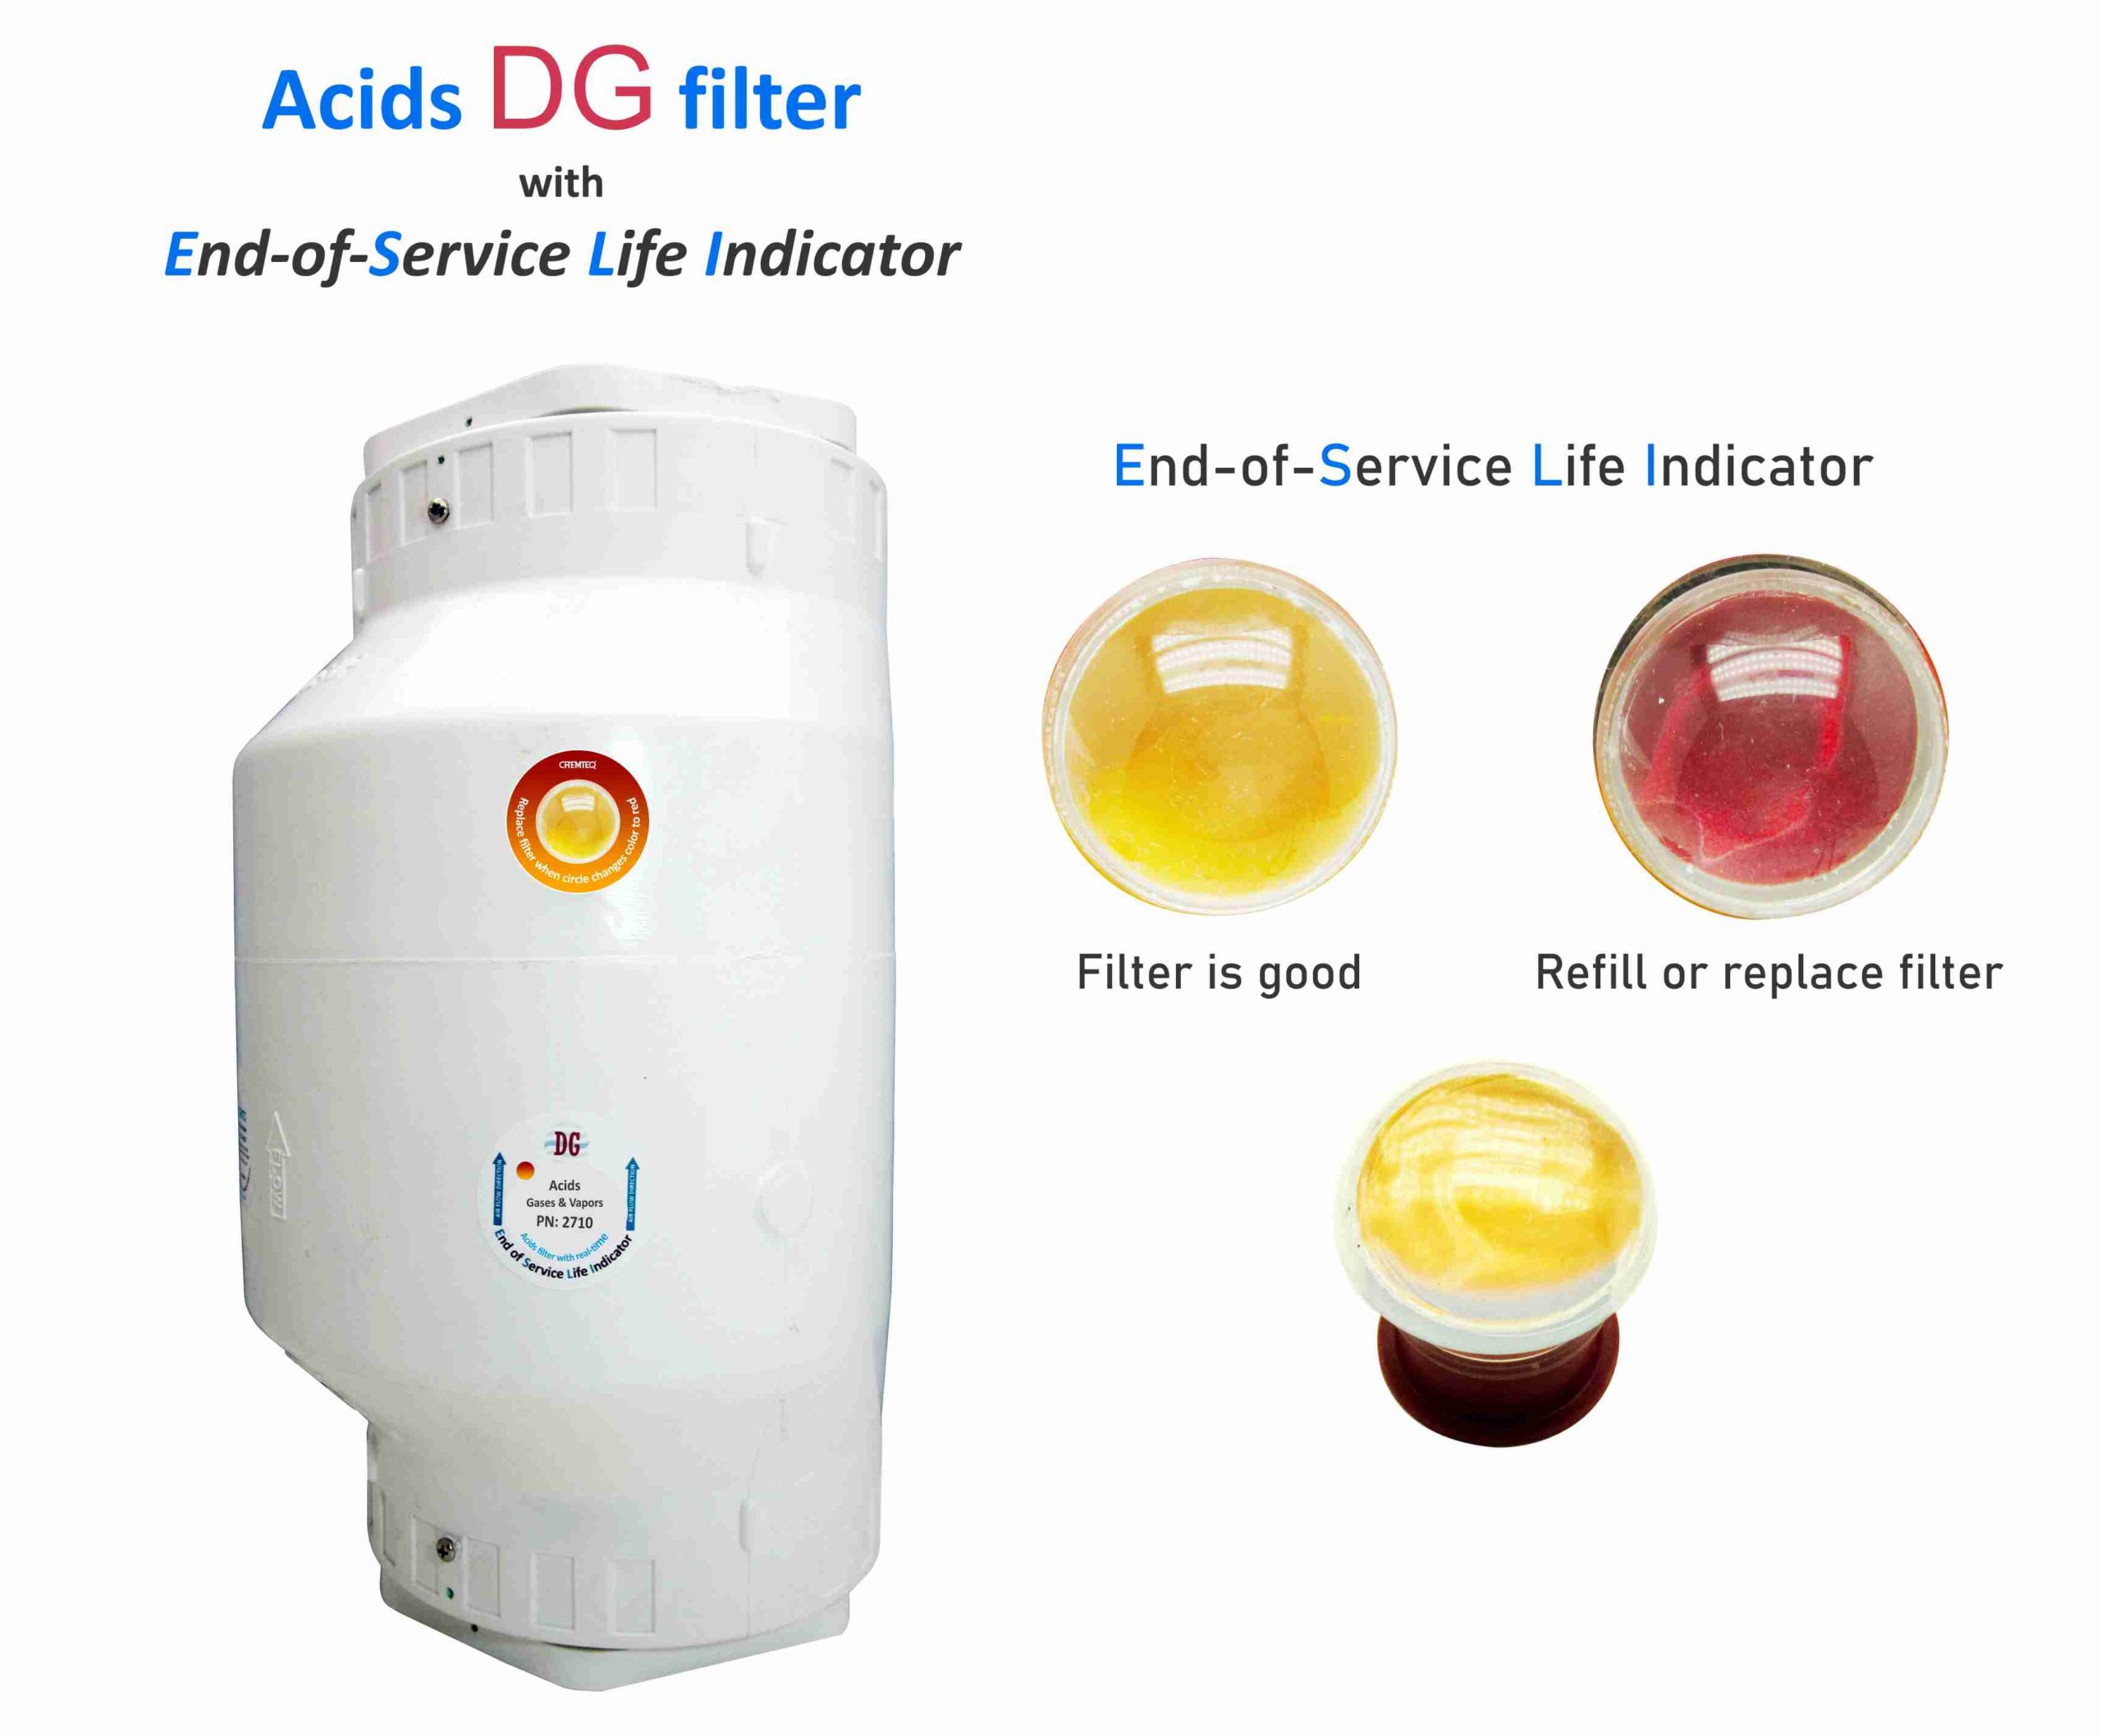 Acids DG FILTER-ESLI 2710. Acids filter with end-of-service life indicator suitable Chemical Processes and Reactors Vents